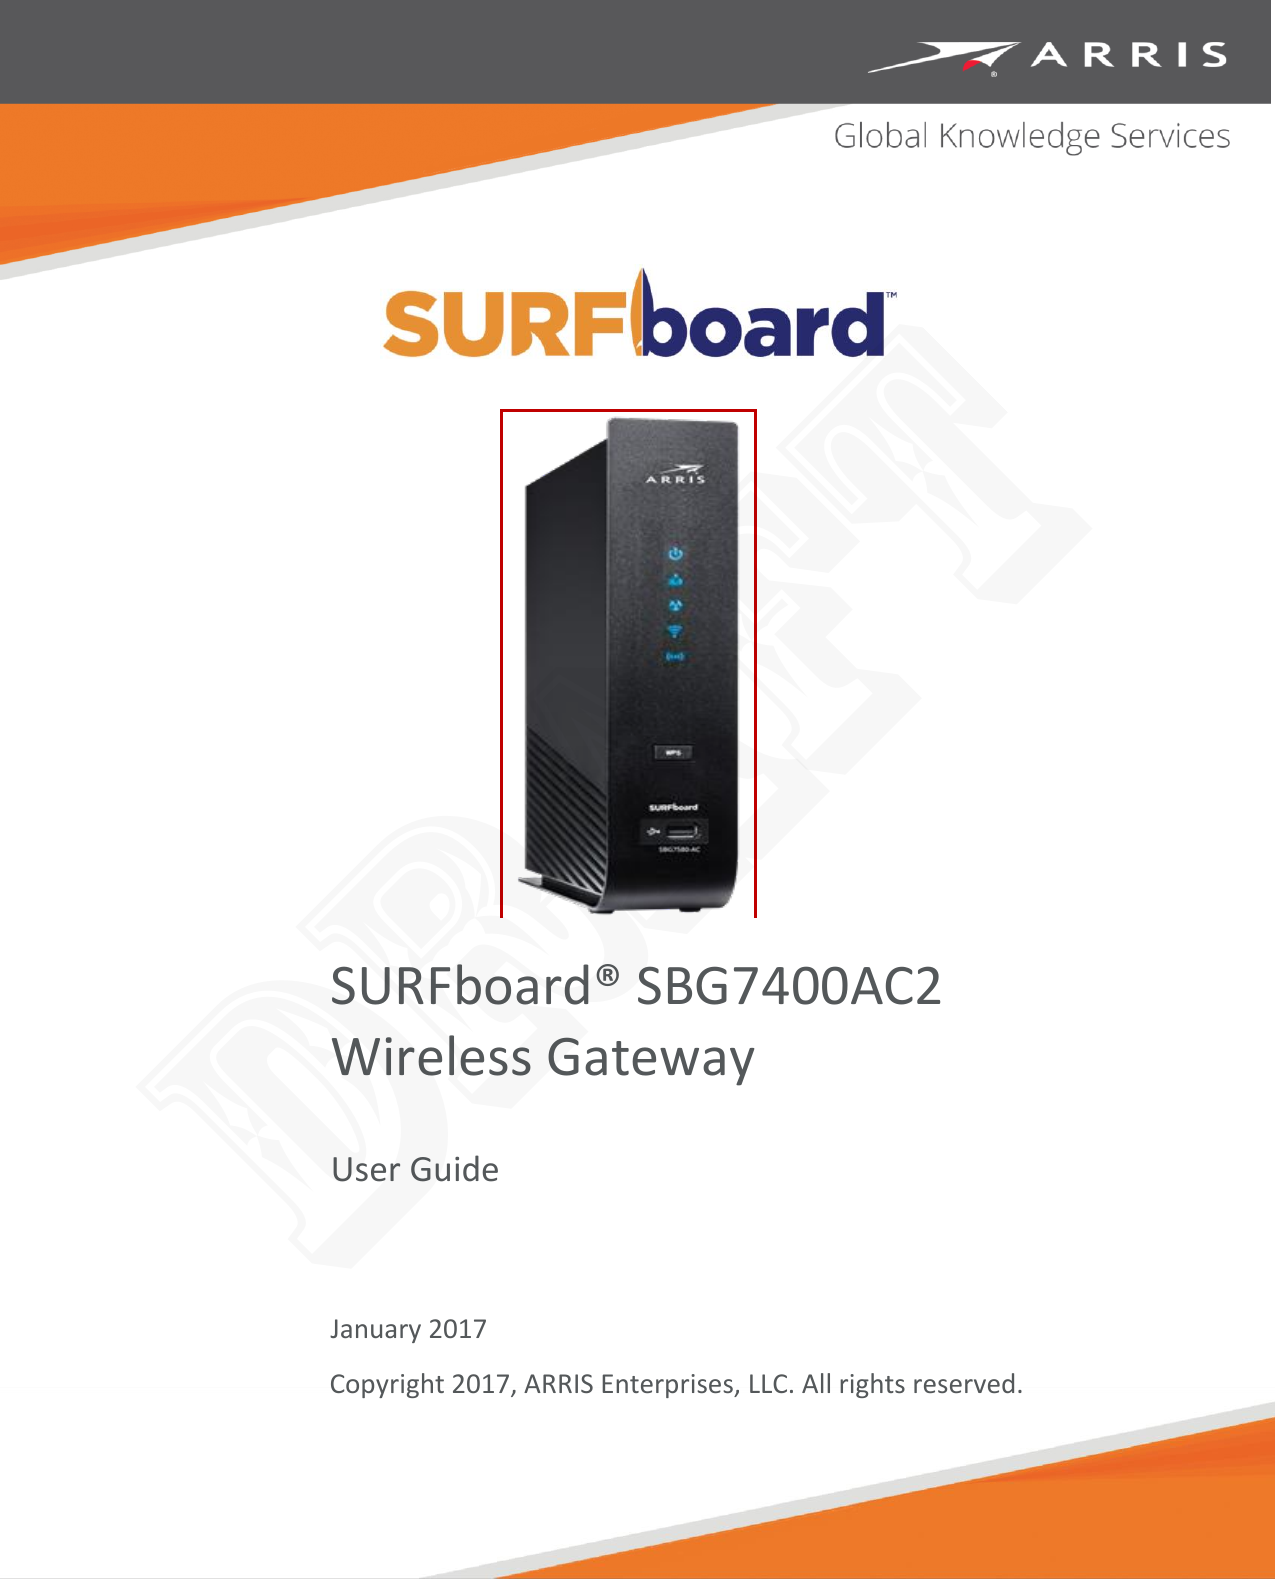   SURFboard® SBG7400AC2 Wireless Gateway User Guide    January 2017 Copyright 2017, ARRIS Enterprises, LLC. All rights reserved.  DRAFT